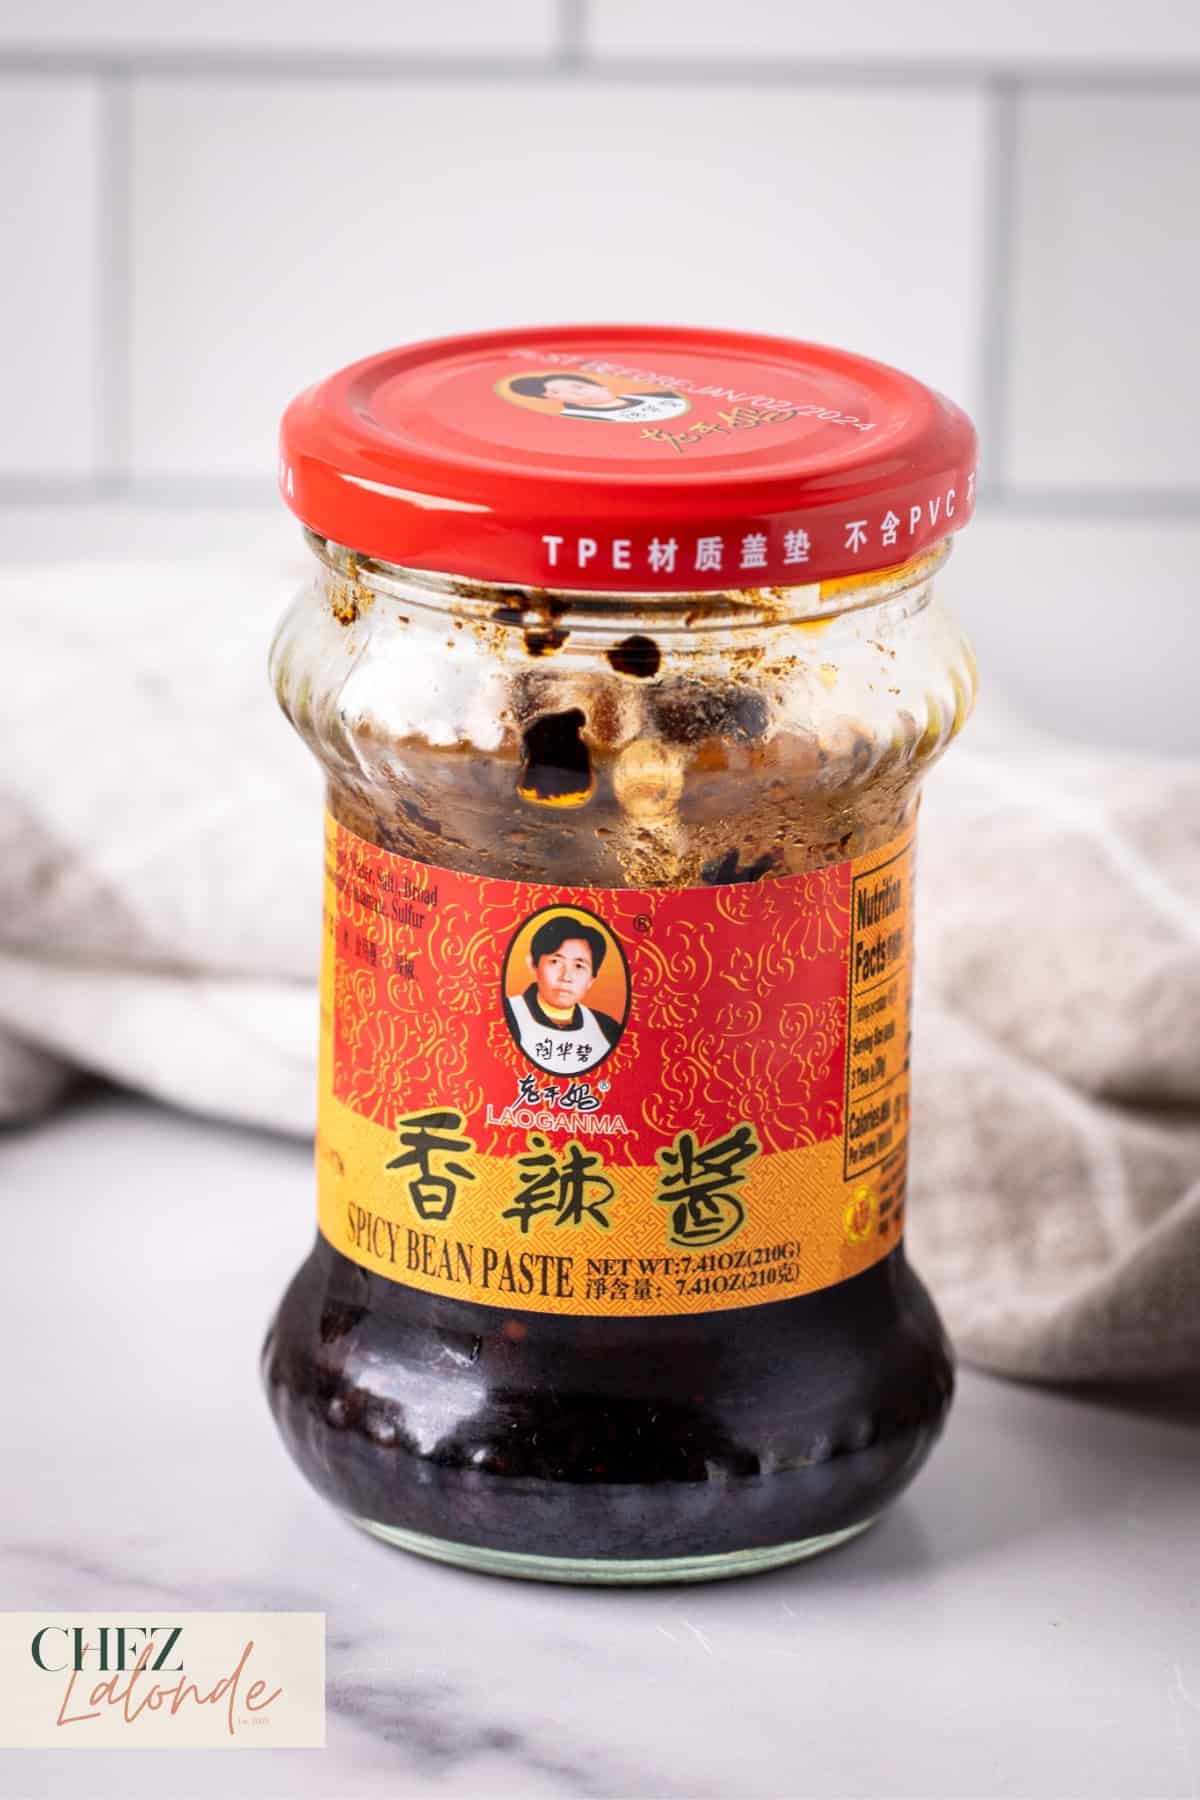 A jar of Chinese Lao Gan Ma Spicy Bean Paste.